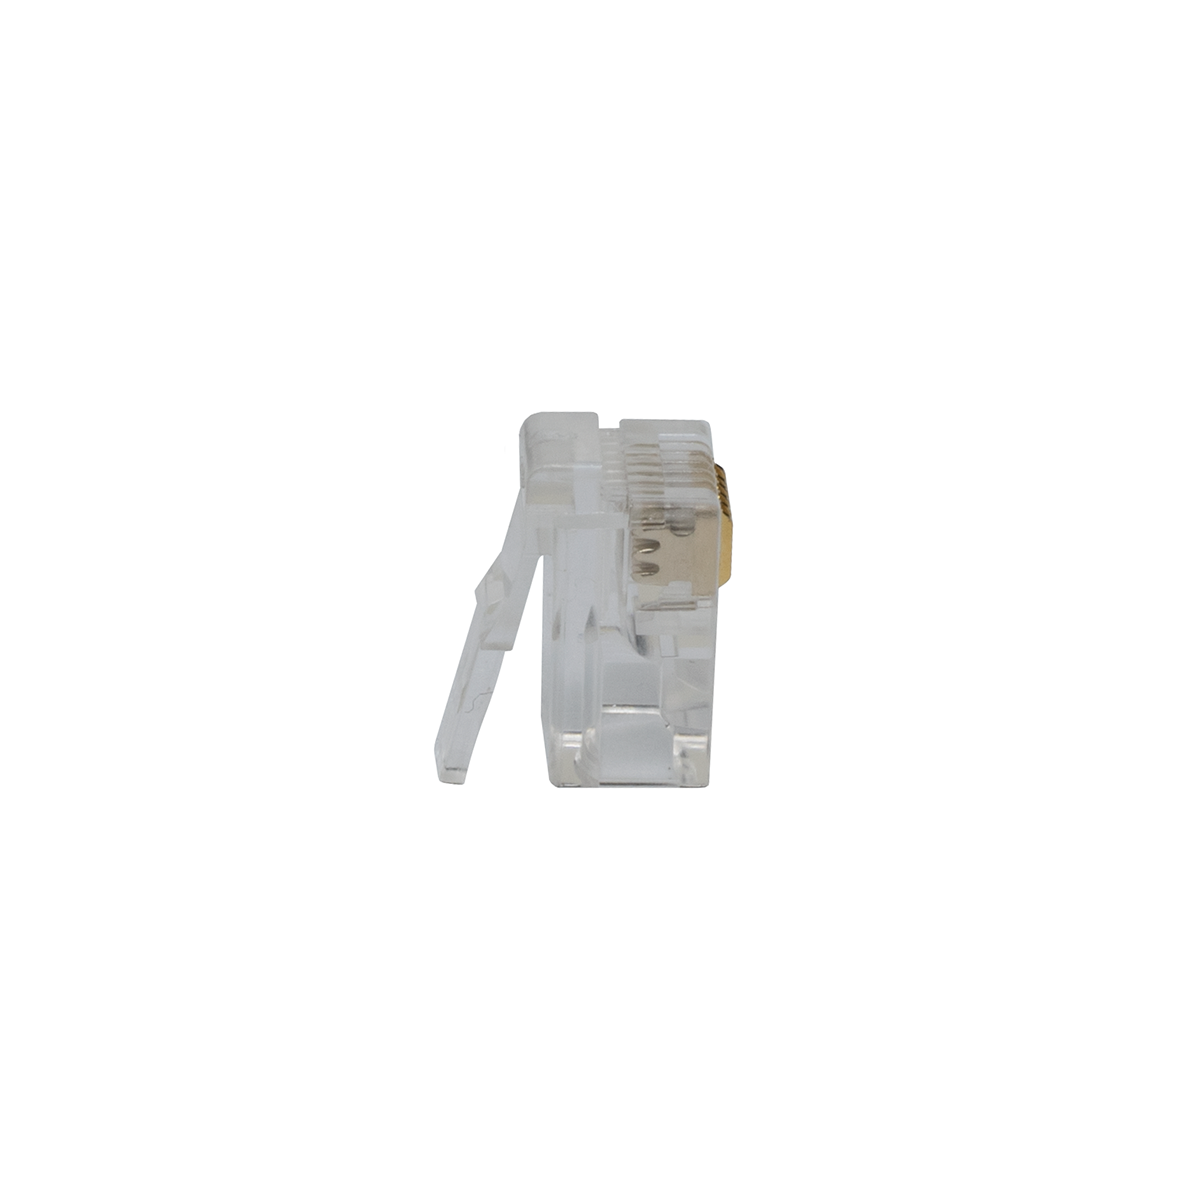 Modular 6P6C Solid Wire Plugs (100 Count) (Side View)